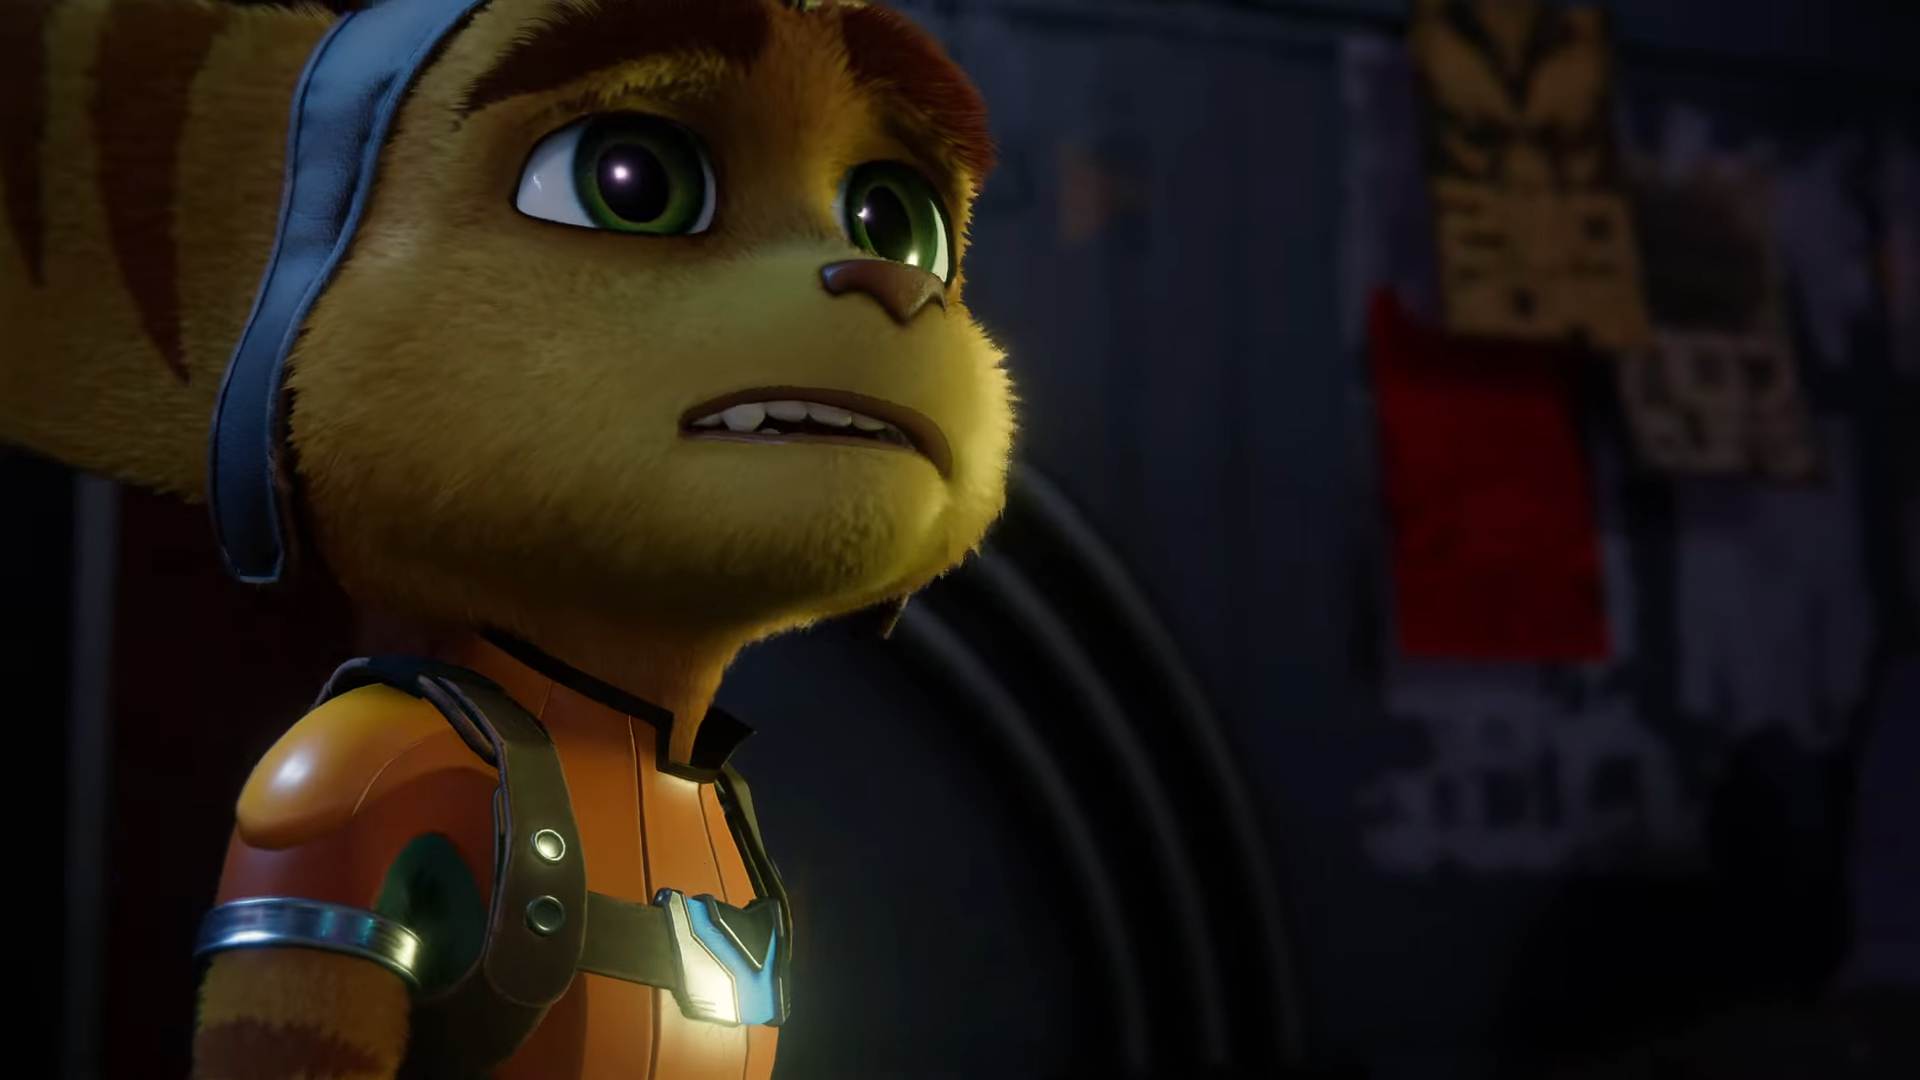 Ratchet & Clank: The Future is Bright on PS5